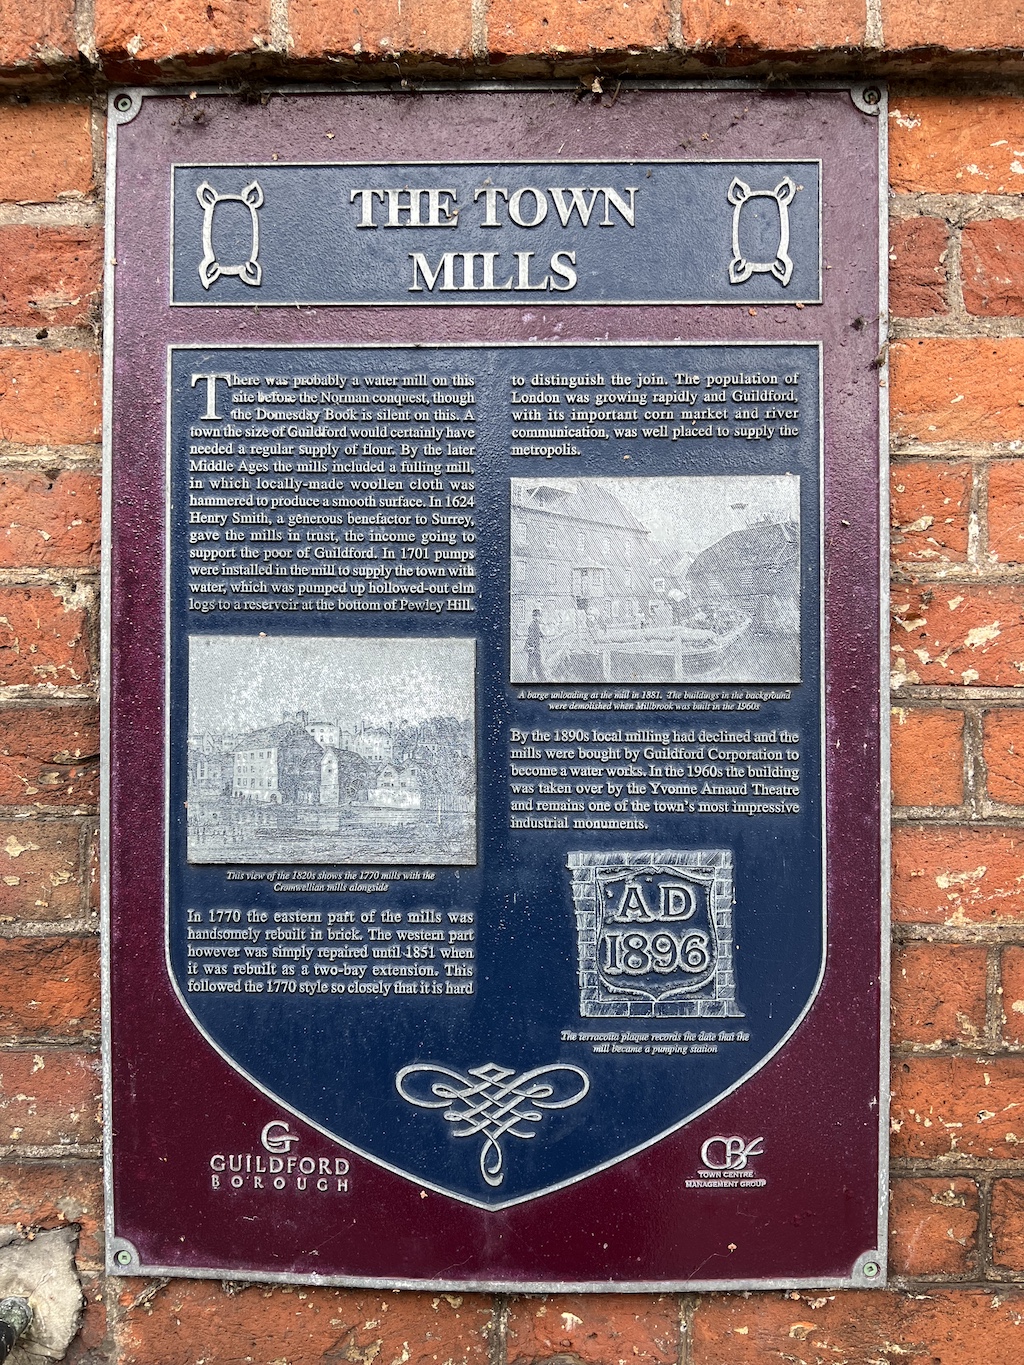 Blue plaque in Guildford for The Town Mills